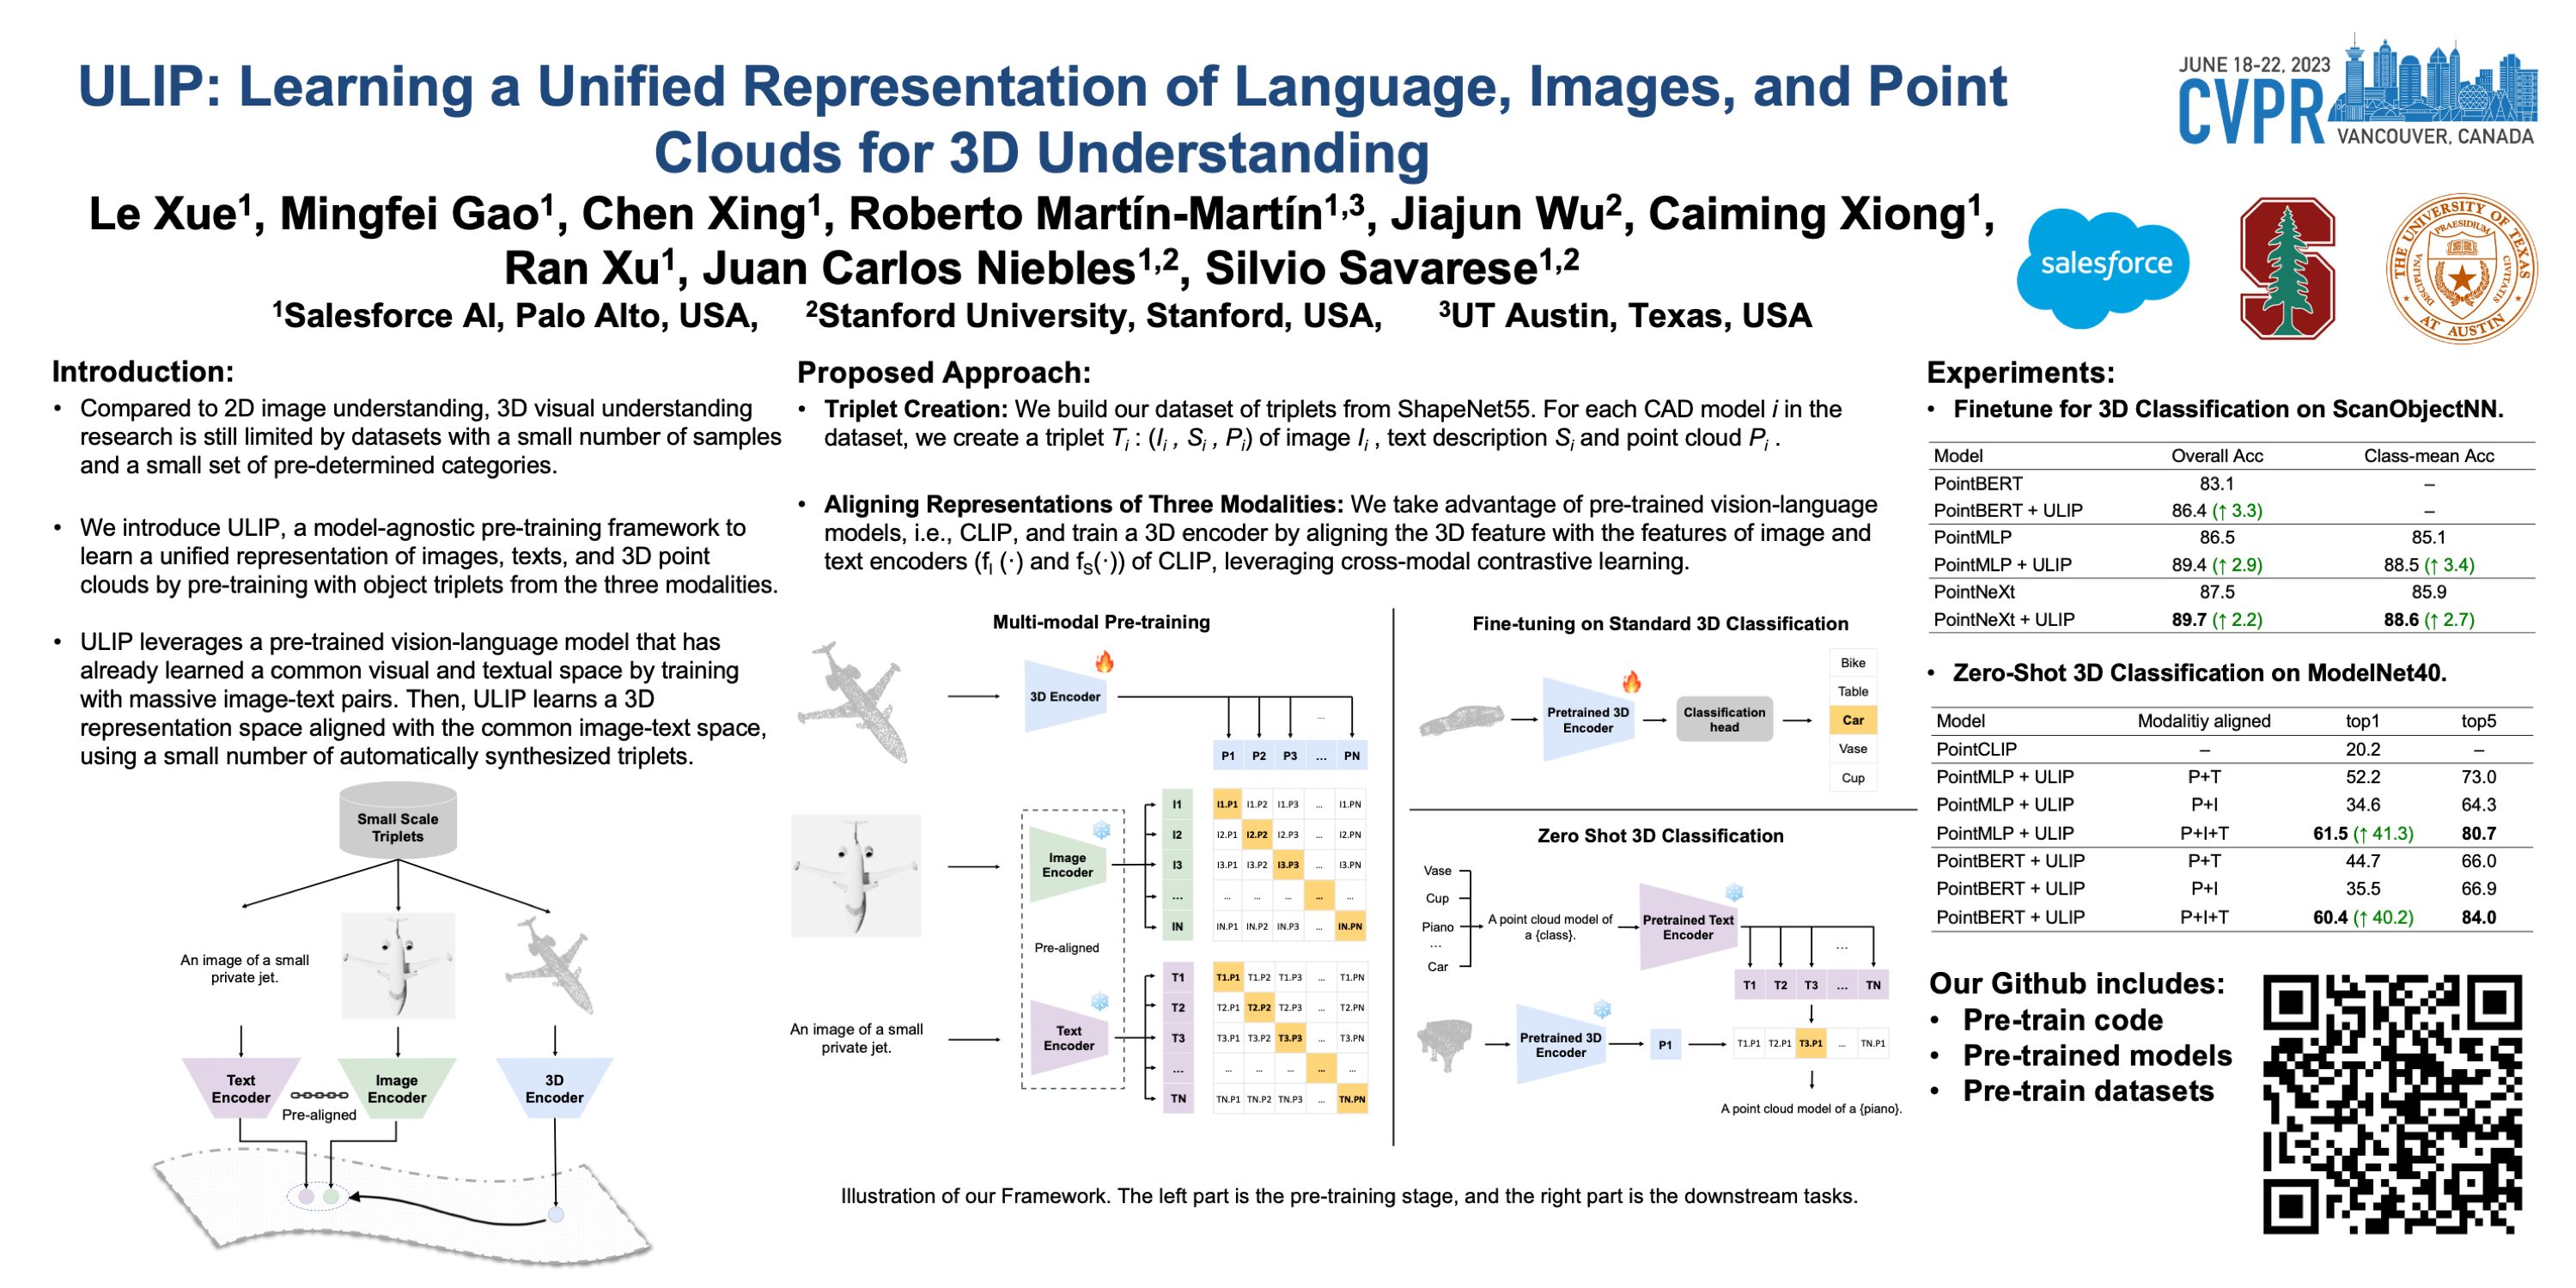 CVPR Poster ULIP Learning a Unified Representation of Language, Images